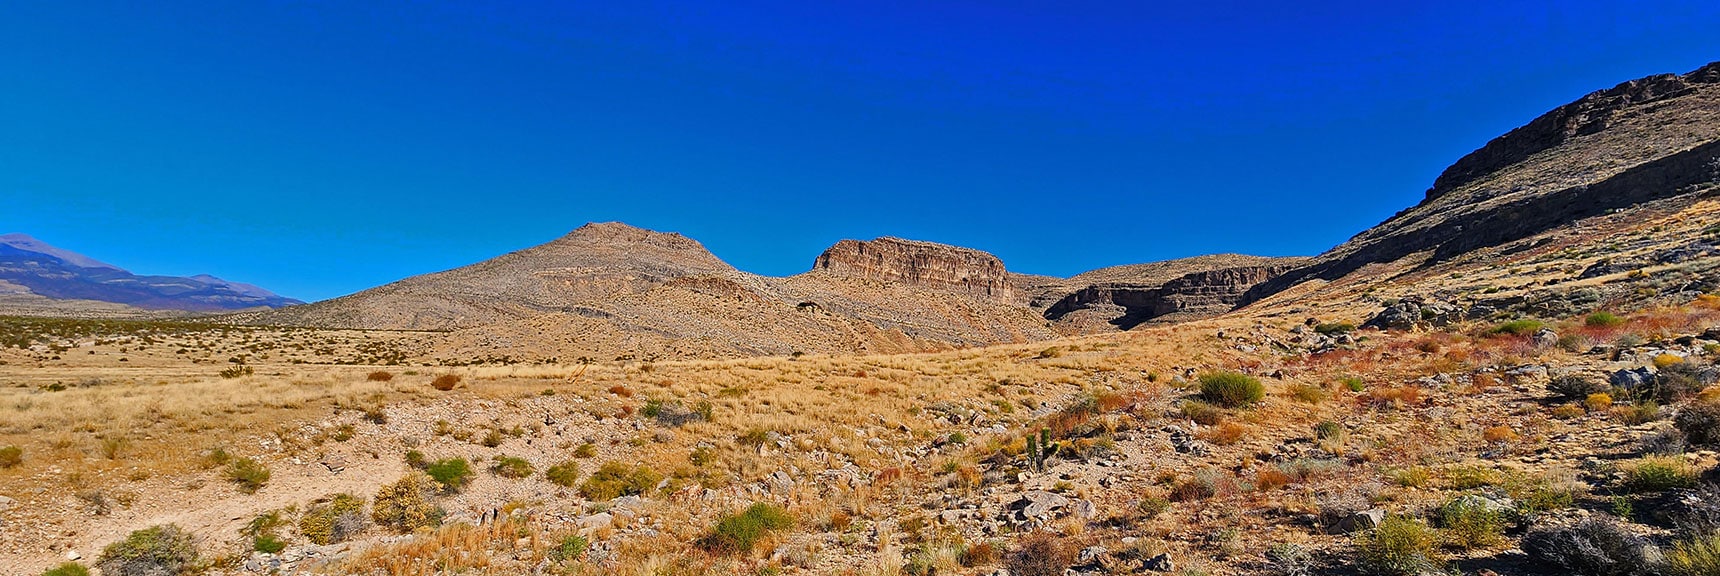 Entering Southern Canyon on West Side of Bluff | Landmark Bluff | Lovell Canyon, Nevada